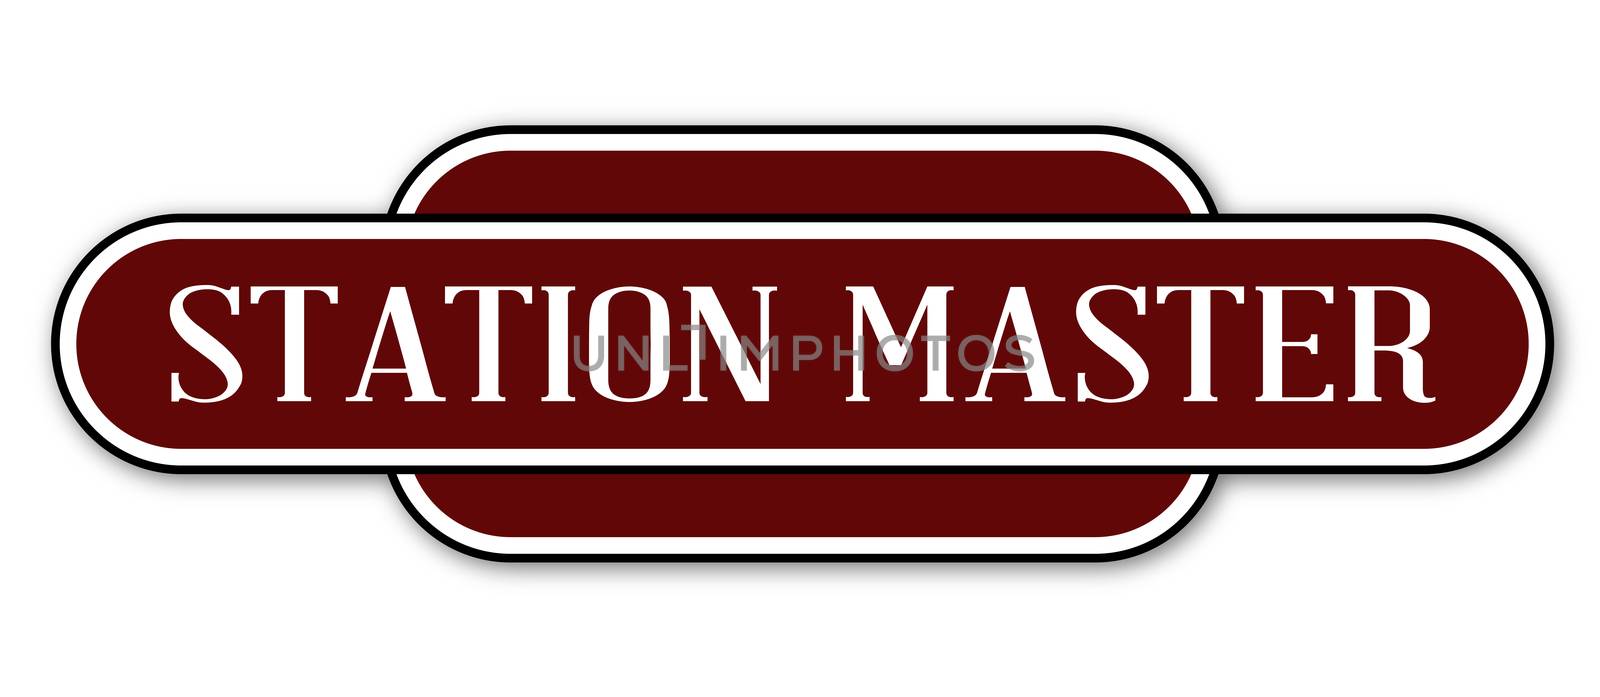 A station master station name plate over a white background